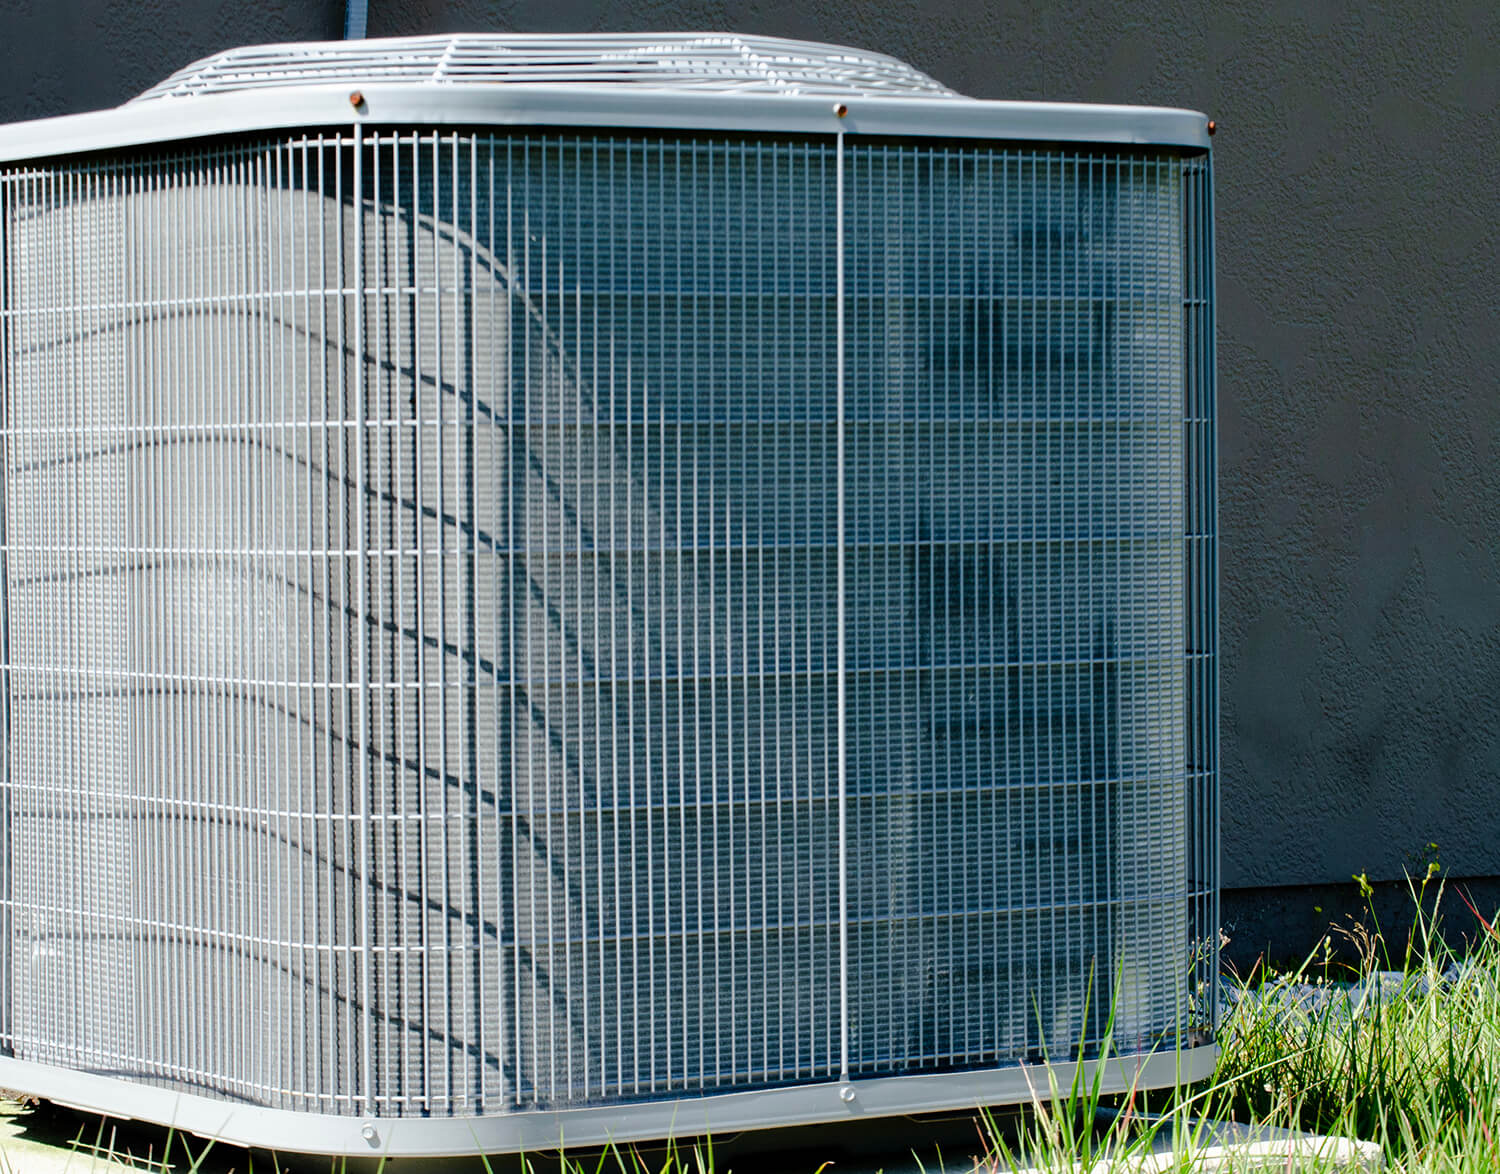 Other forms of Air Conditioners